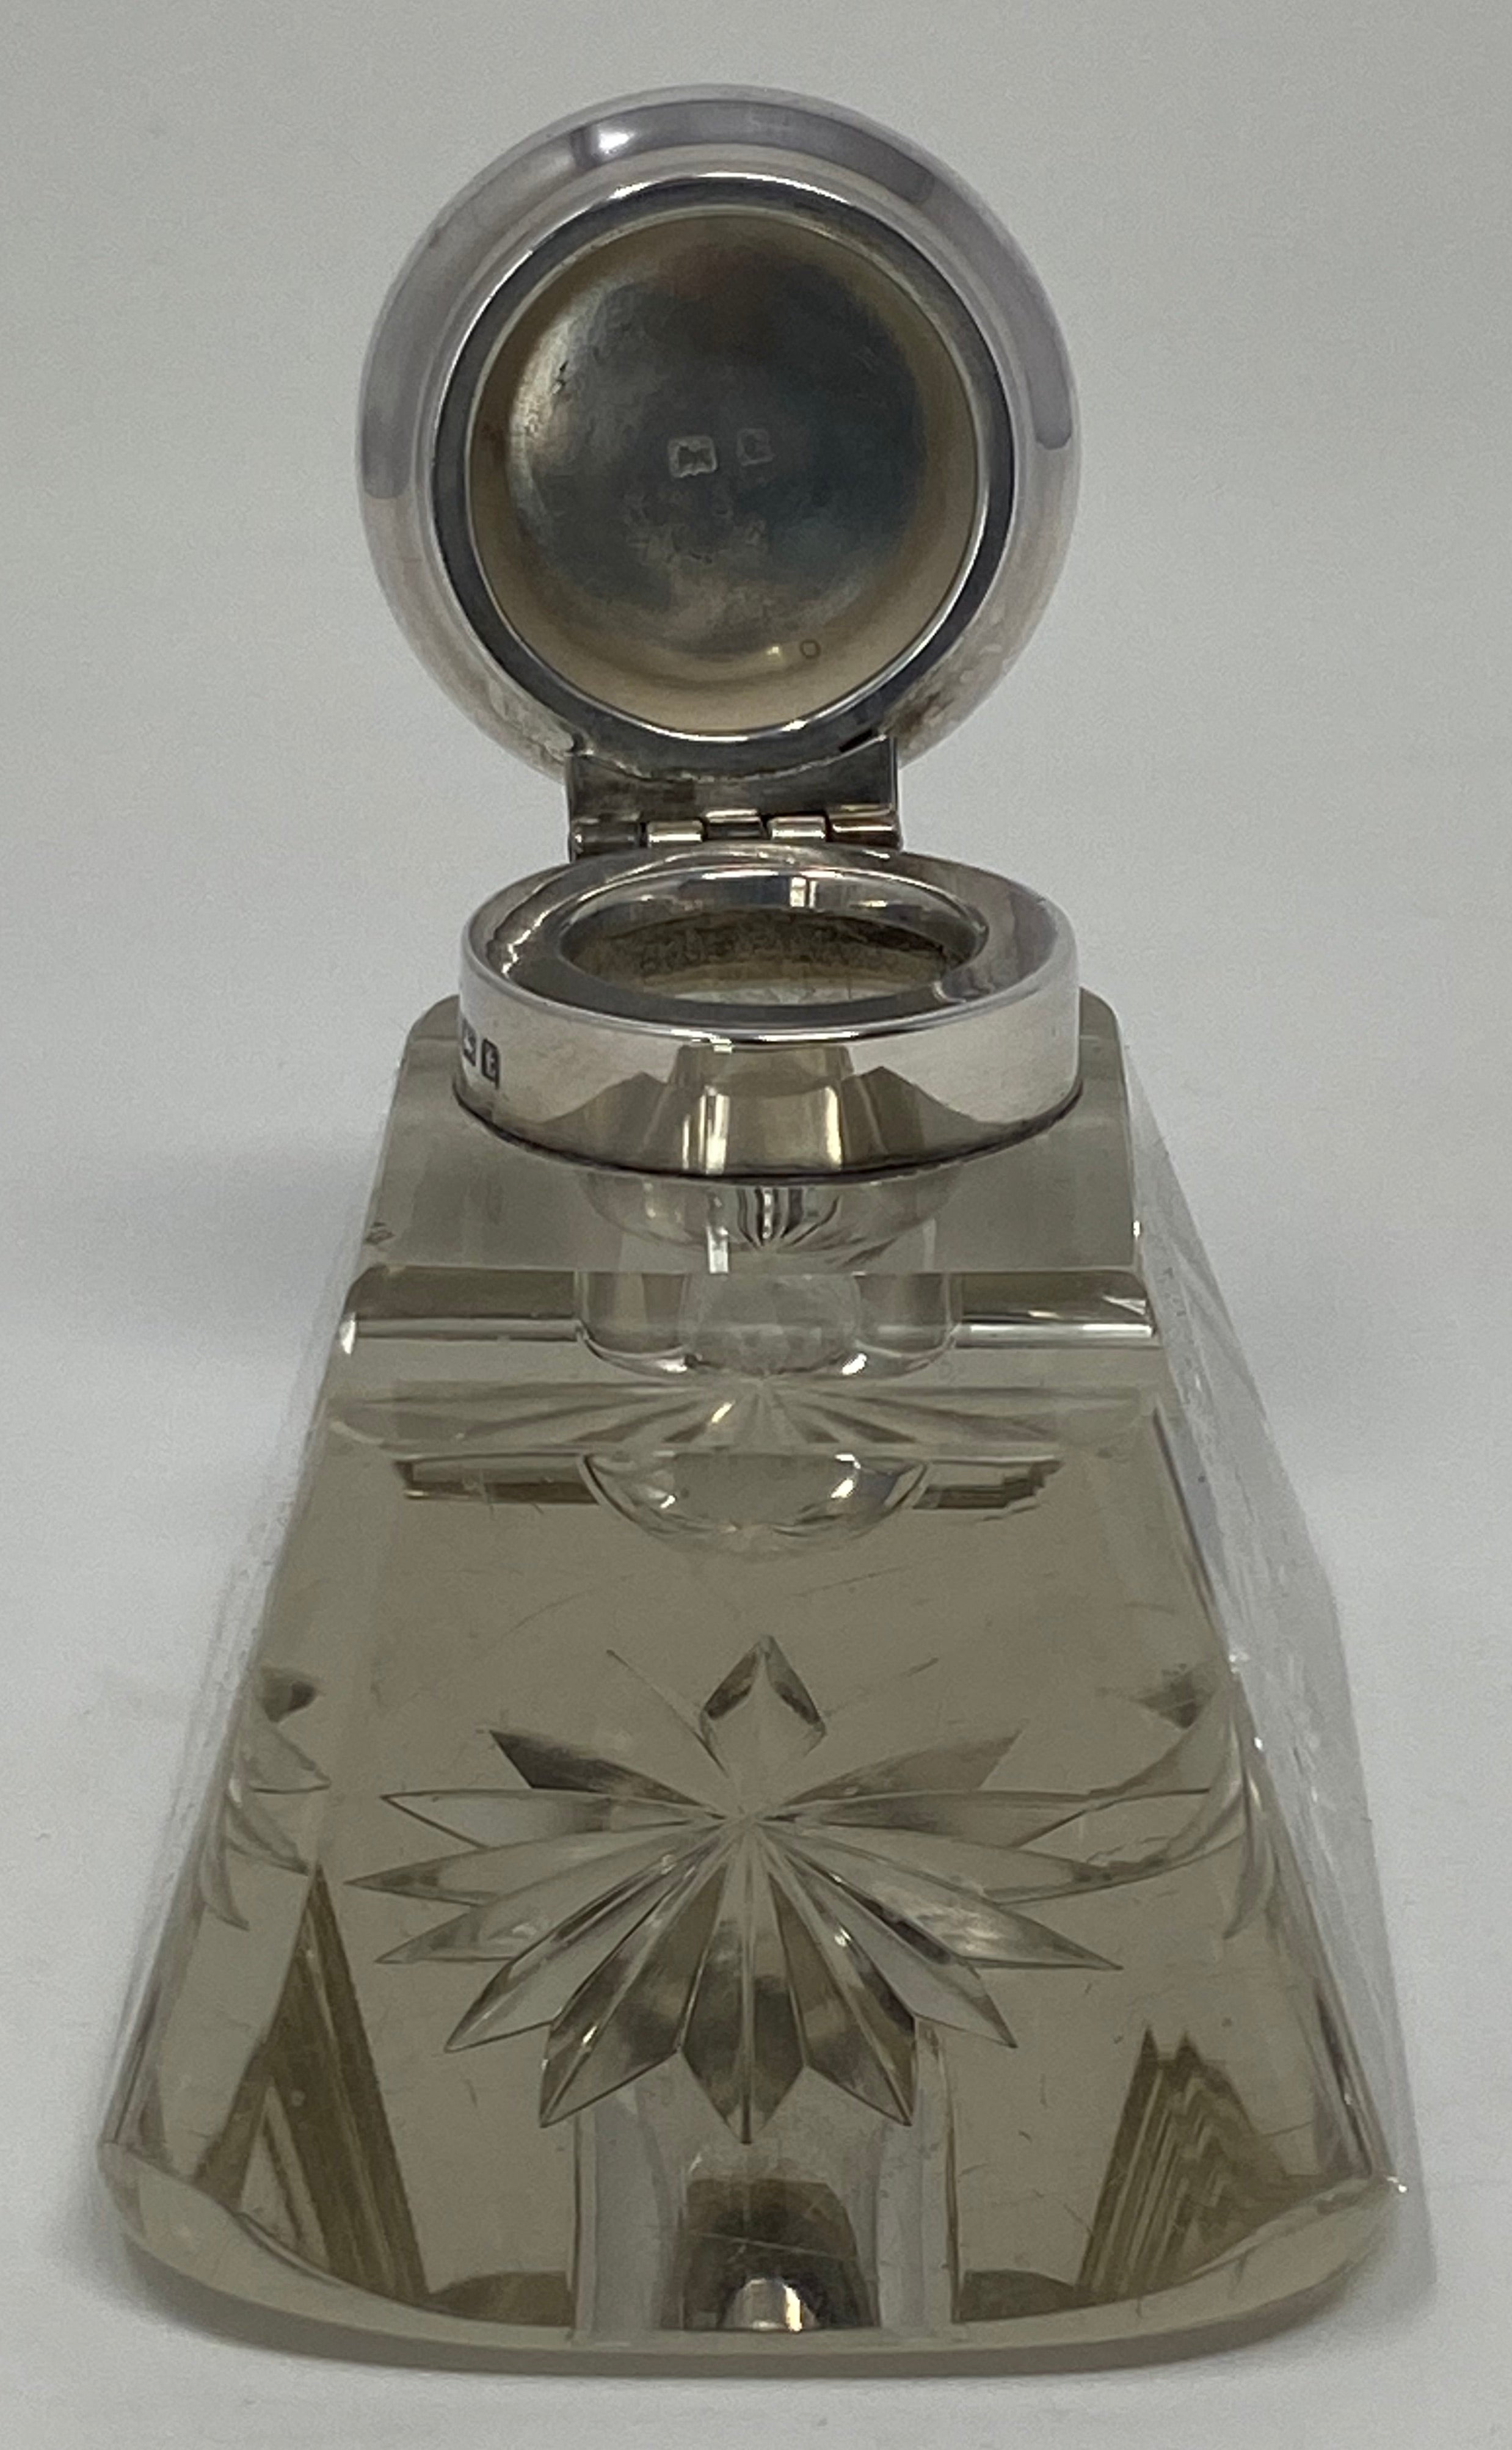 Silver and Glass Inkwell